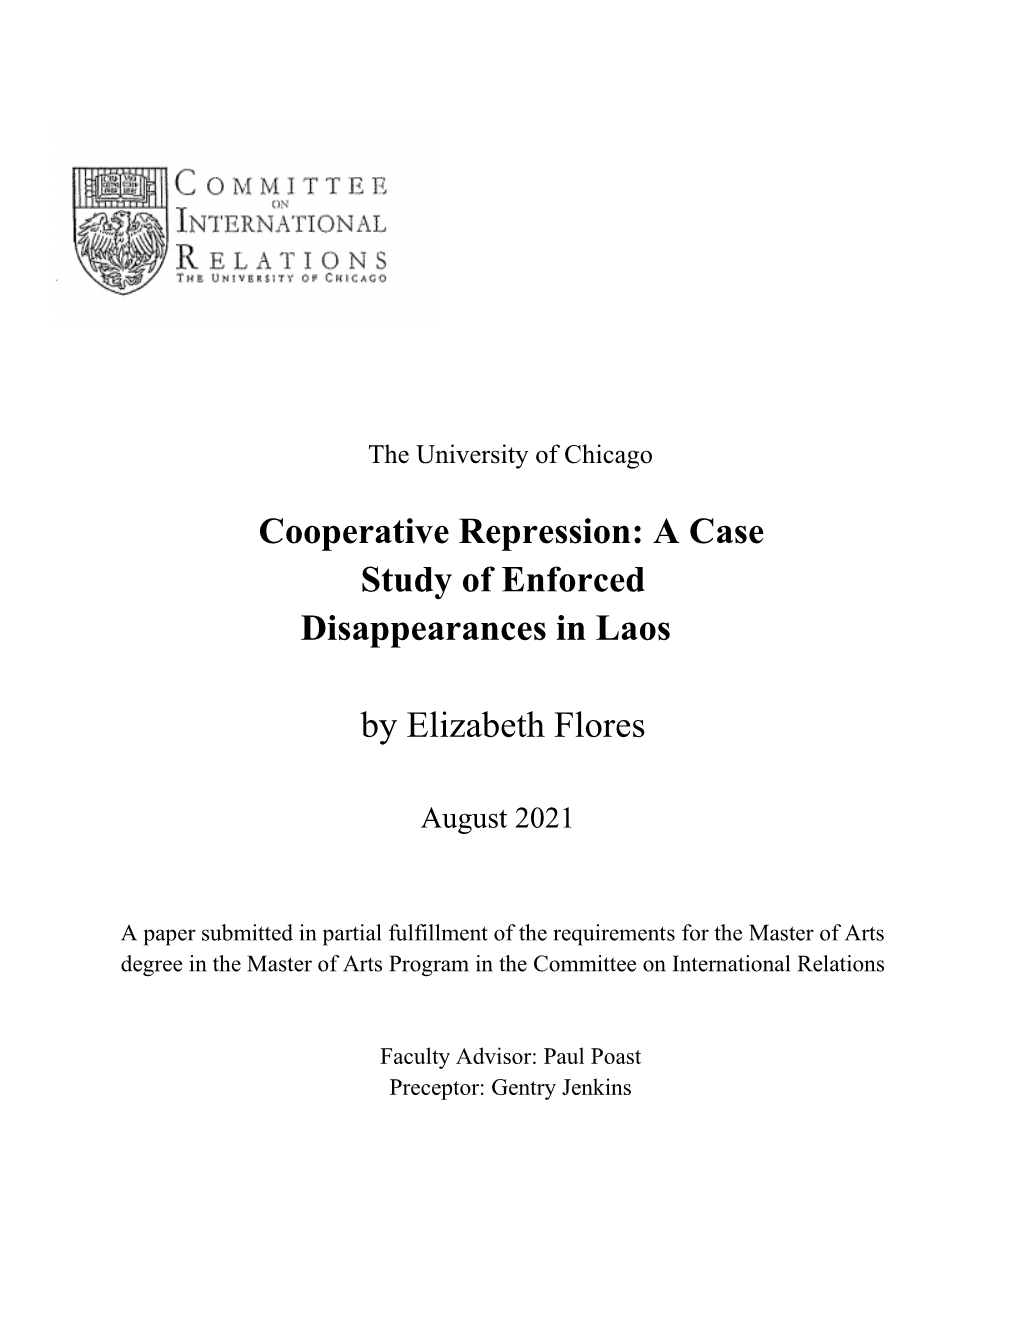 Cooperative Repression: a Case Study of Enforced Disappearances in Laos